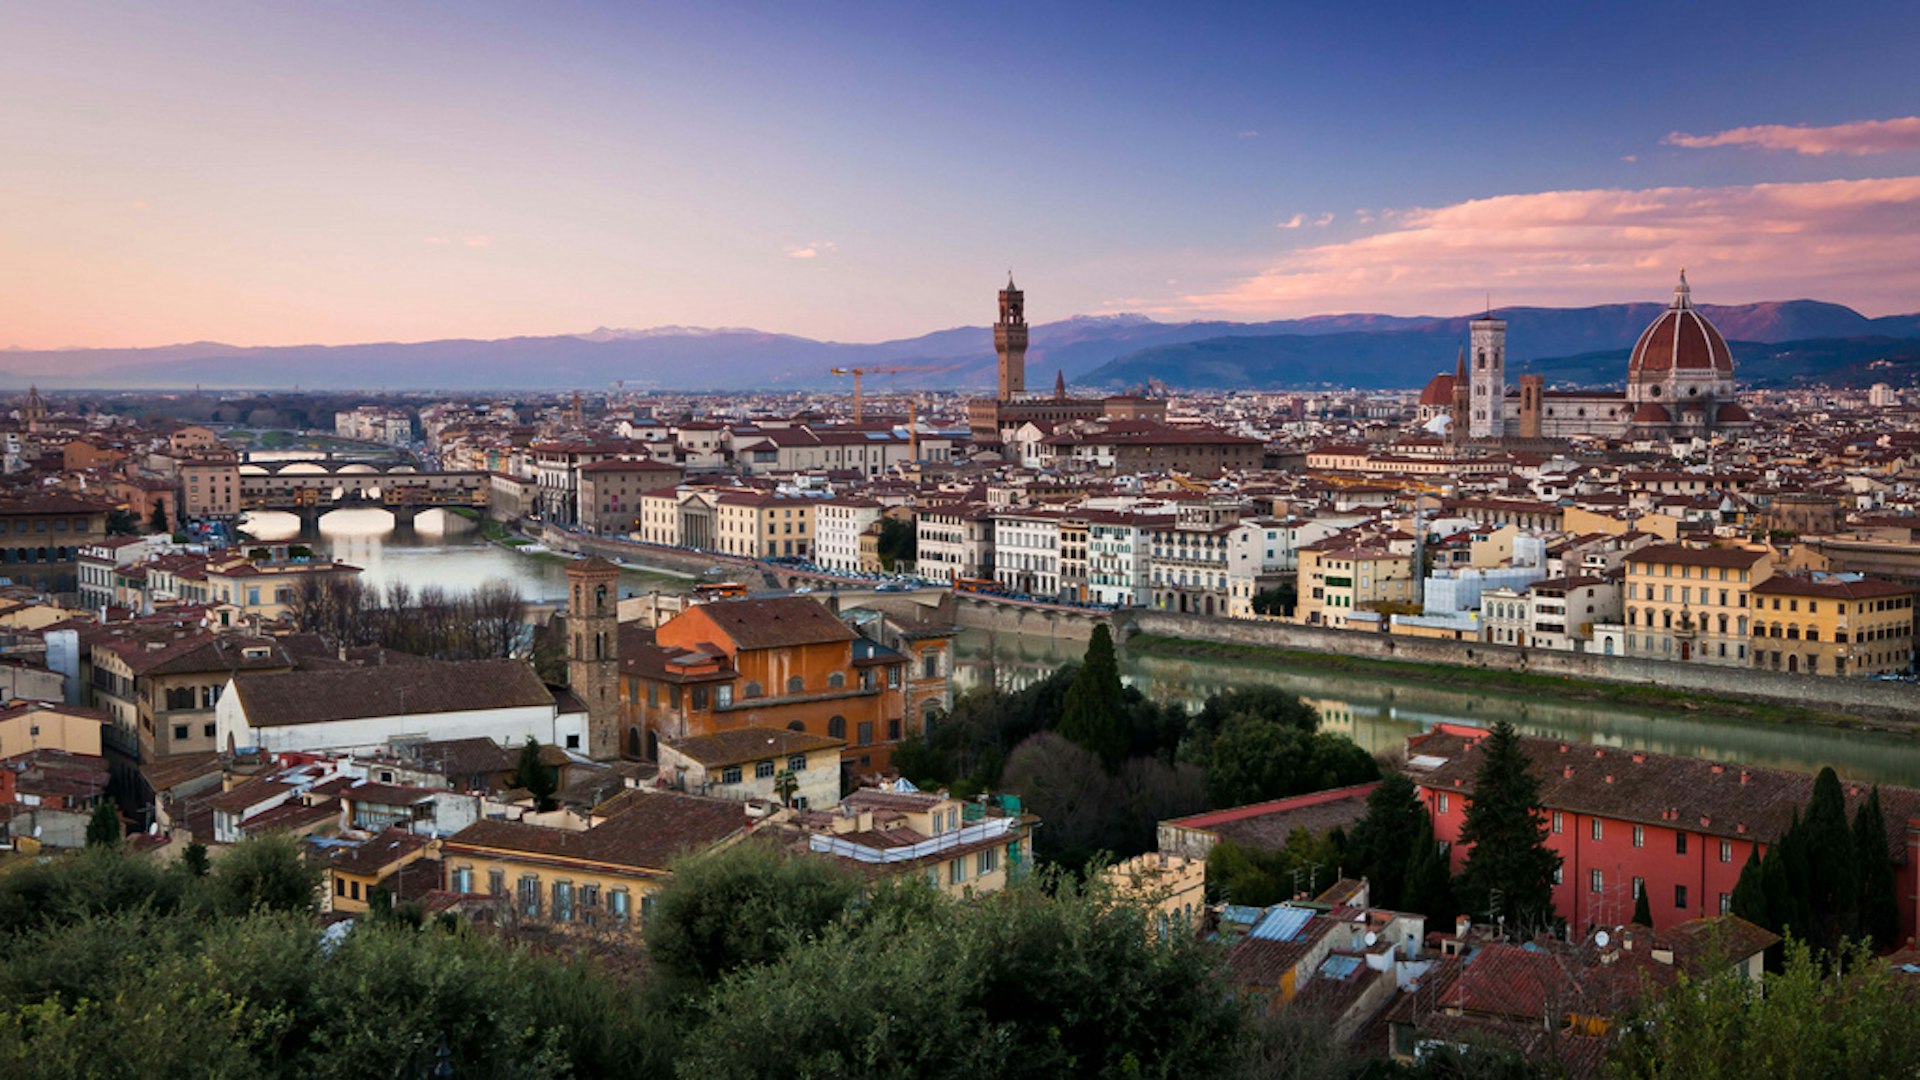 Florence's skyline is as magical today as it has been for centuries. Image by Benson Kua. CC BY-SA 2.0